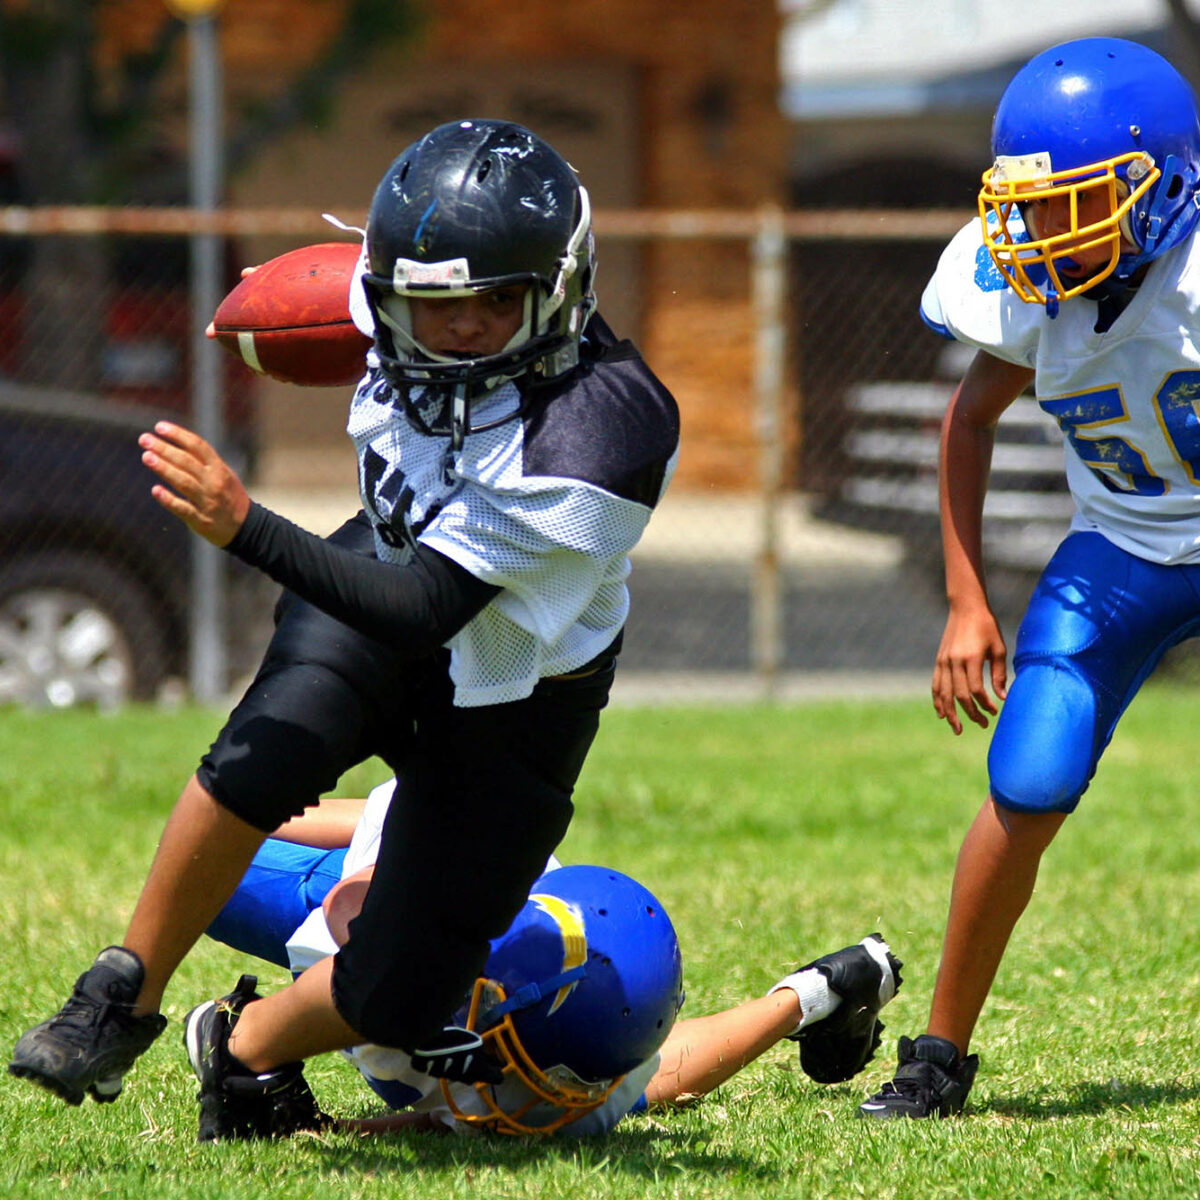 New BU Study Finds Tackle Football at Young Age Raises Risk for